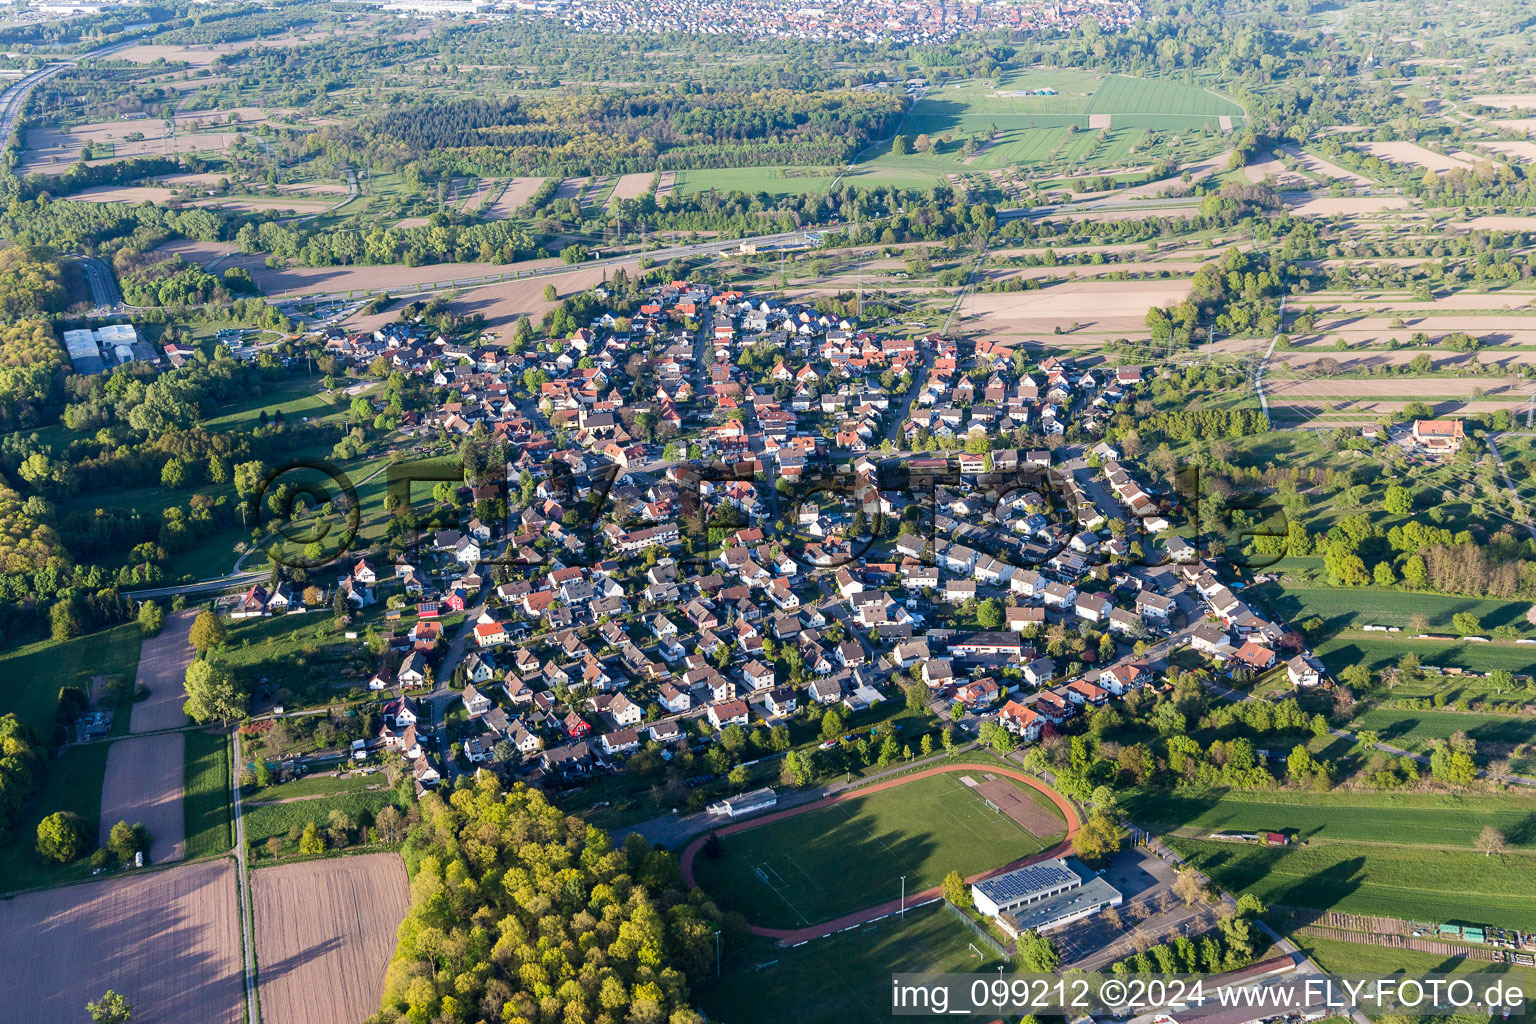 Town View of the streets and houses of the residential areas in the district Rauental in Rastatt in the state Baden-Wurttemberg, Germany